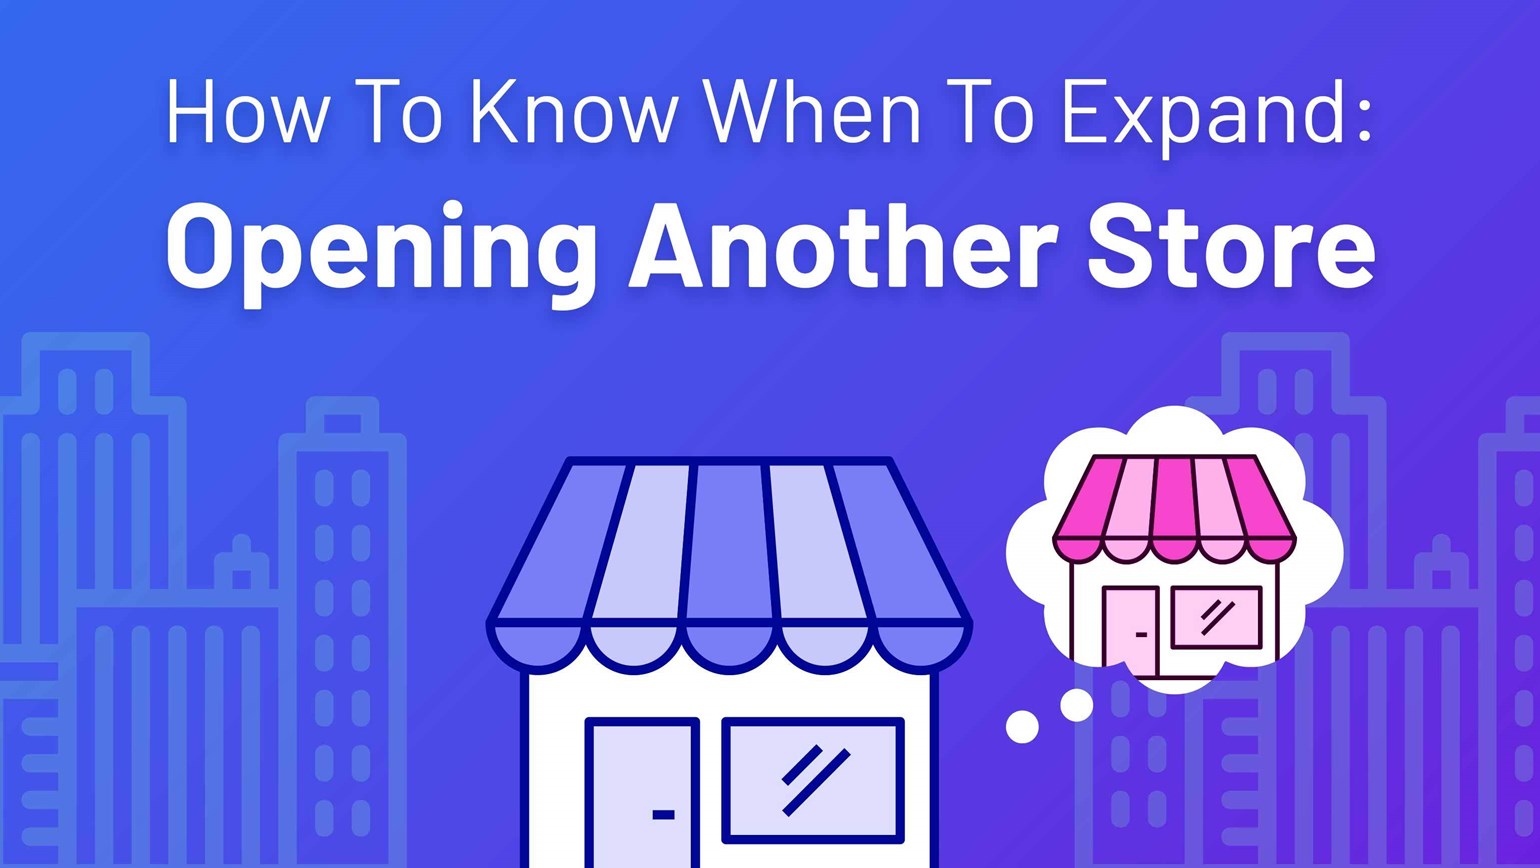 How To Know When To Expand: Opening Another Store